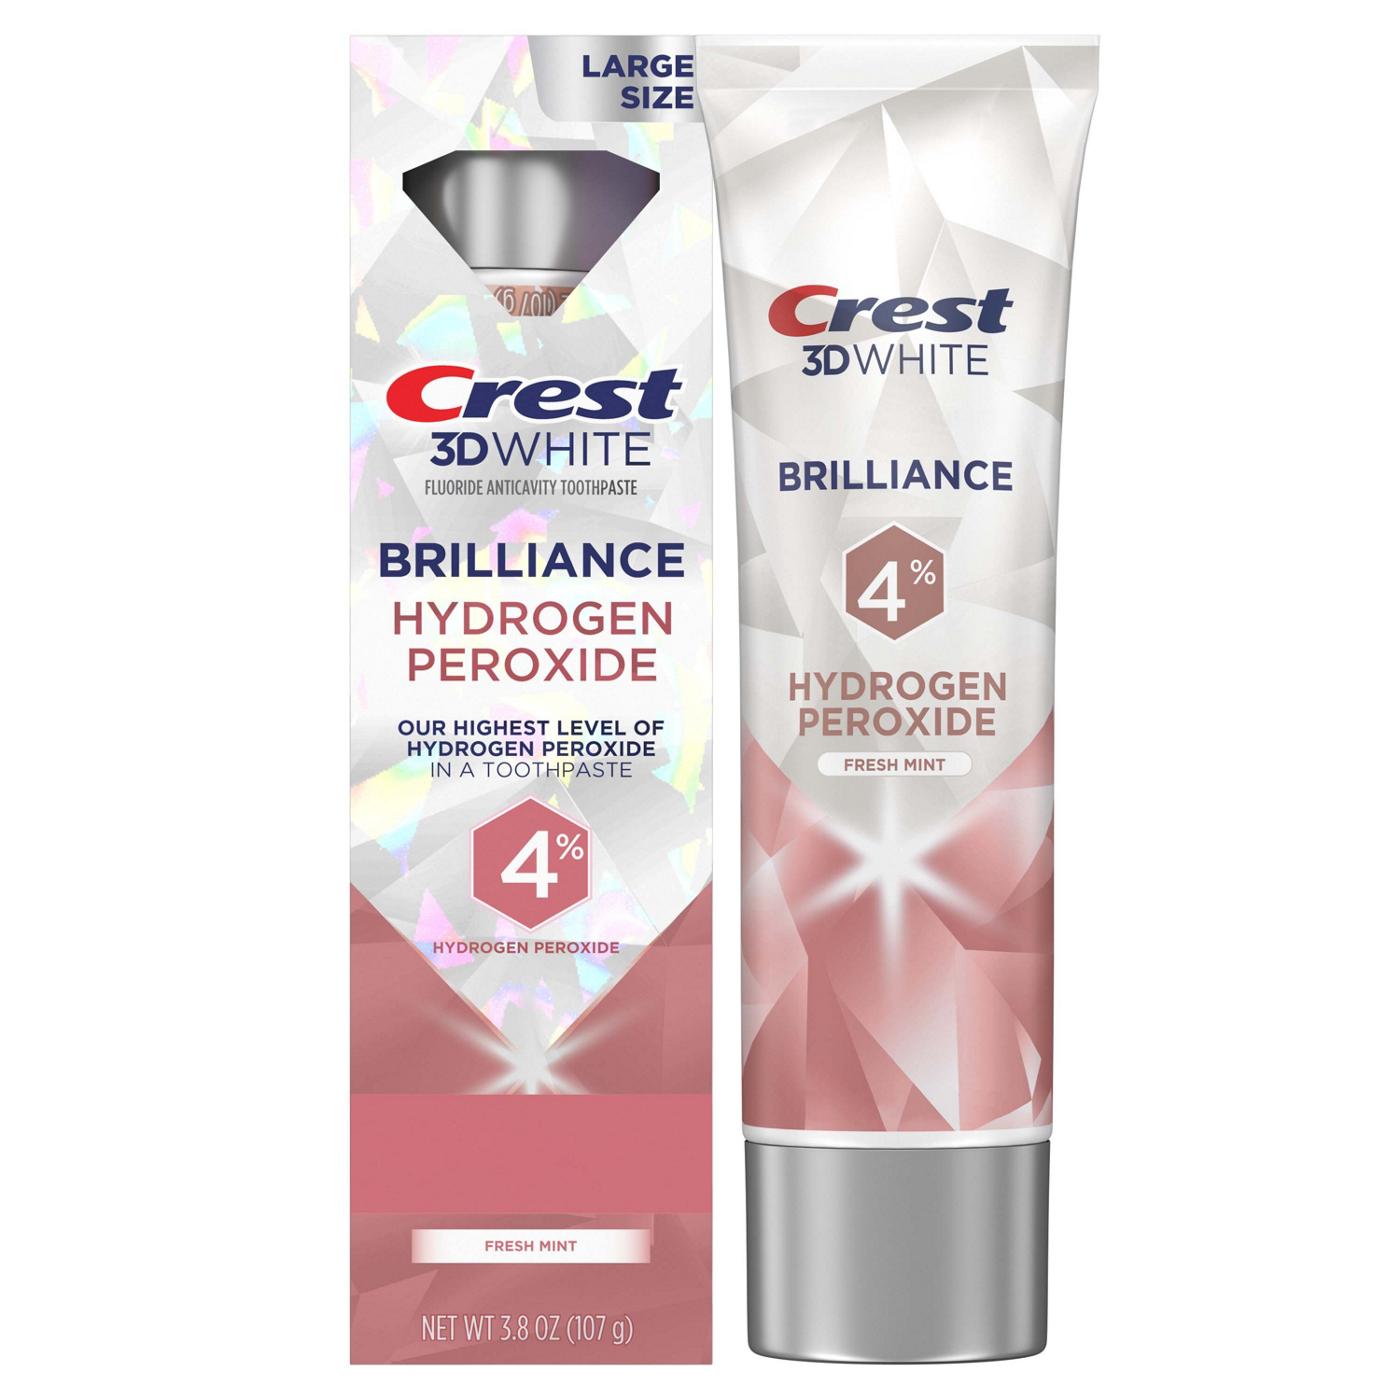 Crest 3D White Brilliance Hydrogen Peroxide Toothpaste - Fresh Mint; image 2 of 7